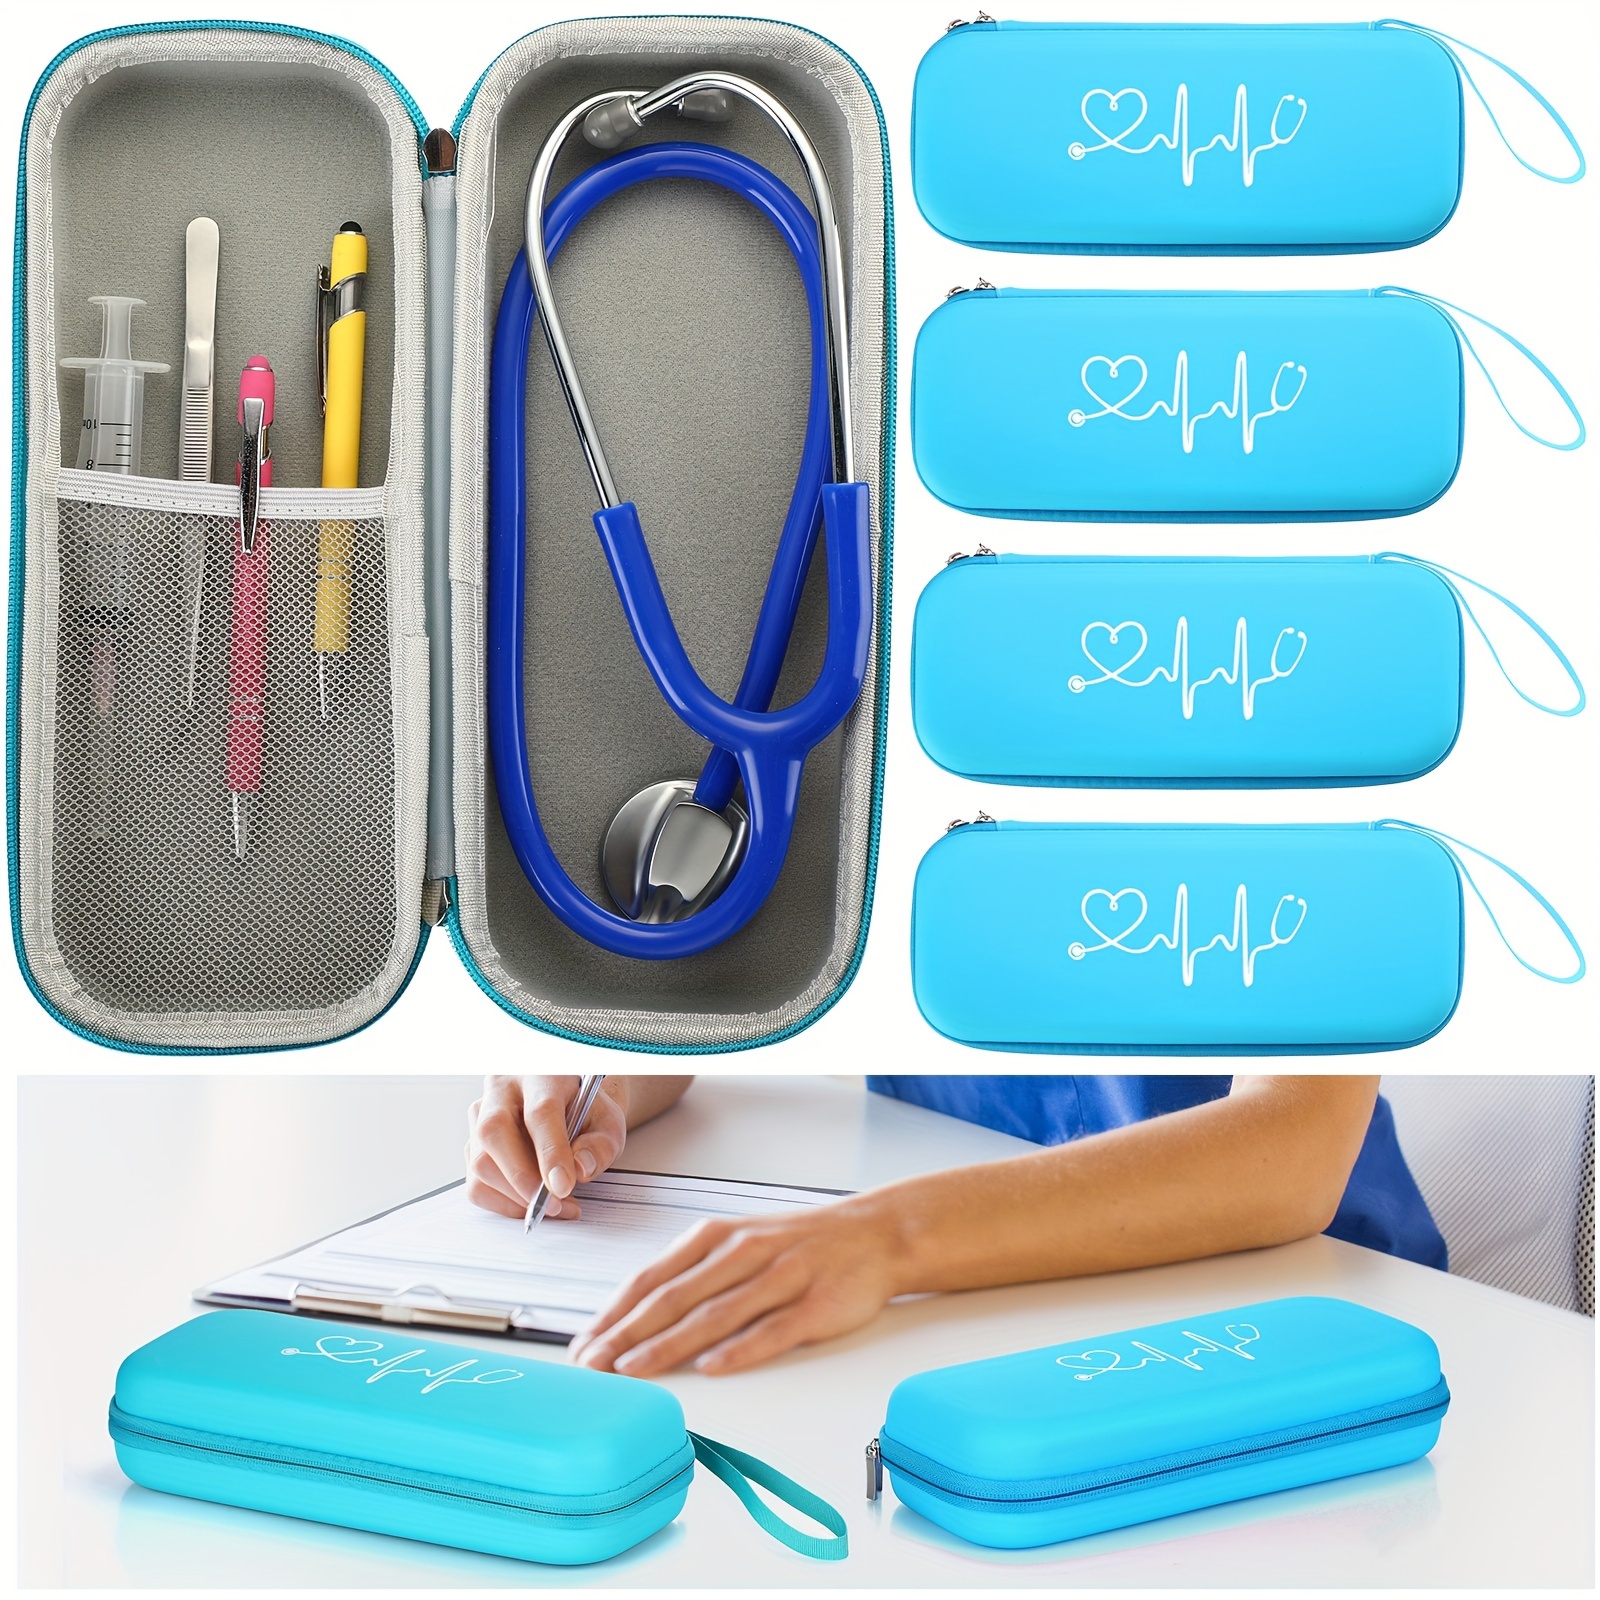 

4pcs Cna Week Gifts Stethoscope Carrying Case Stethoscope Travel Case For Nurses Week Gift Lightweight Nurse Gifts For Women Stethoscope Case For Nurse Appreciation Gifts (blue)